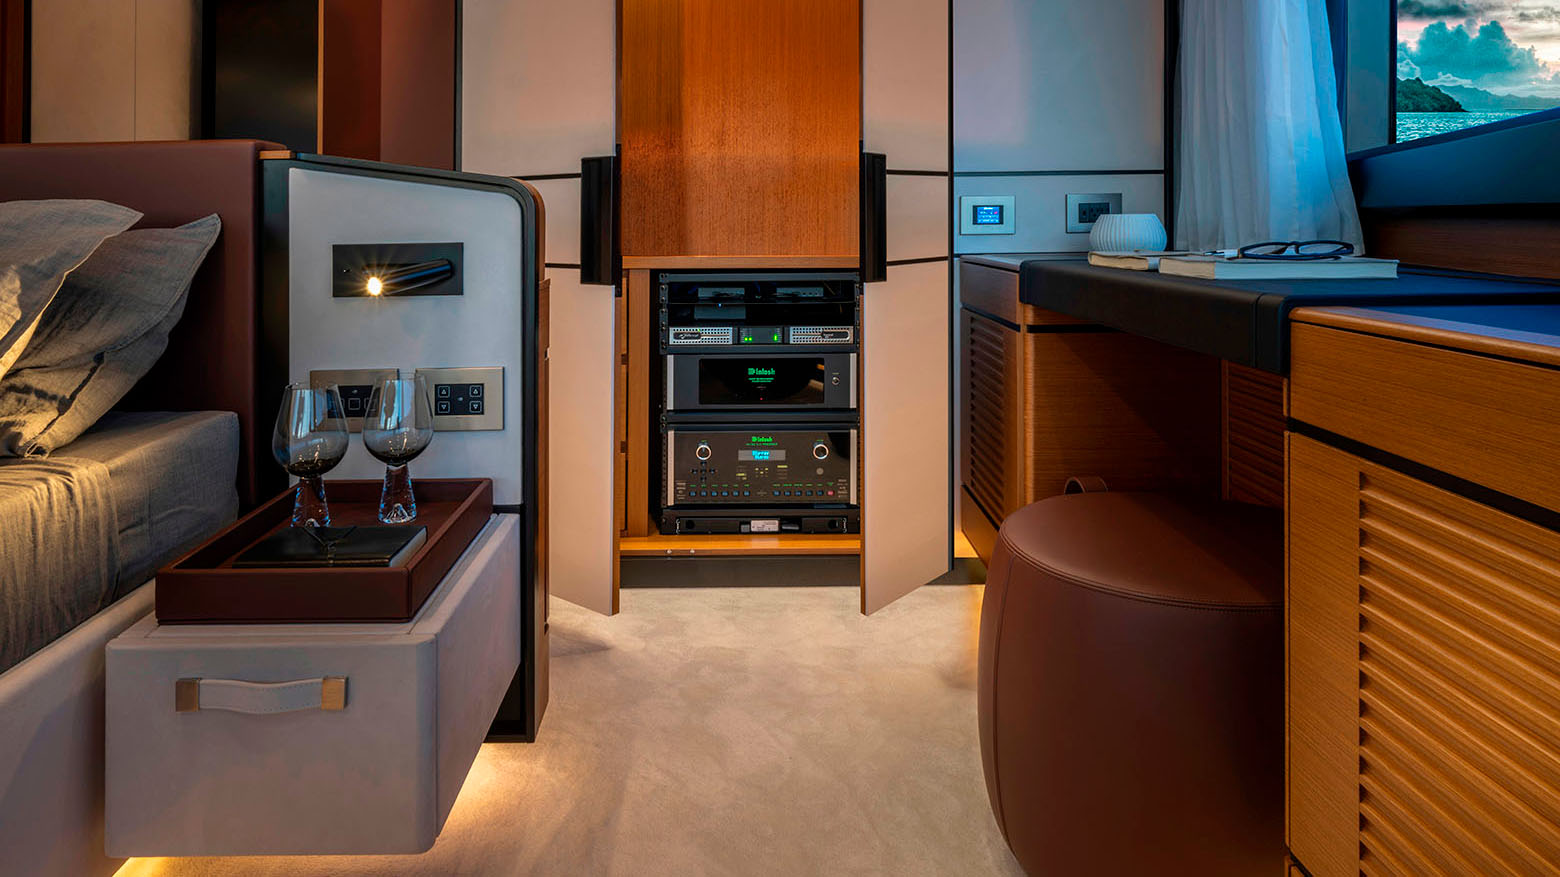 McIntosh amplifiers and Wally yachts